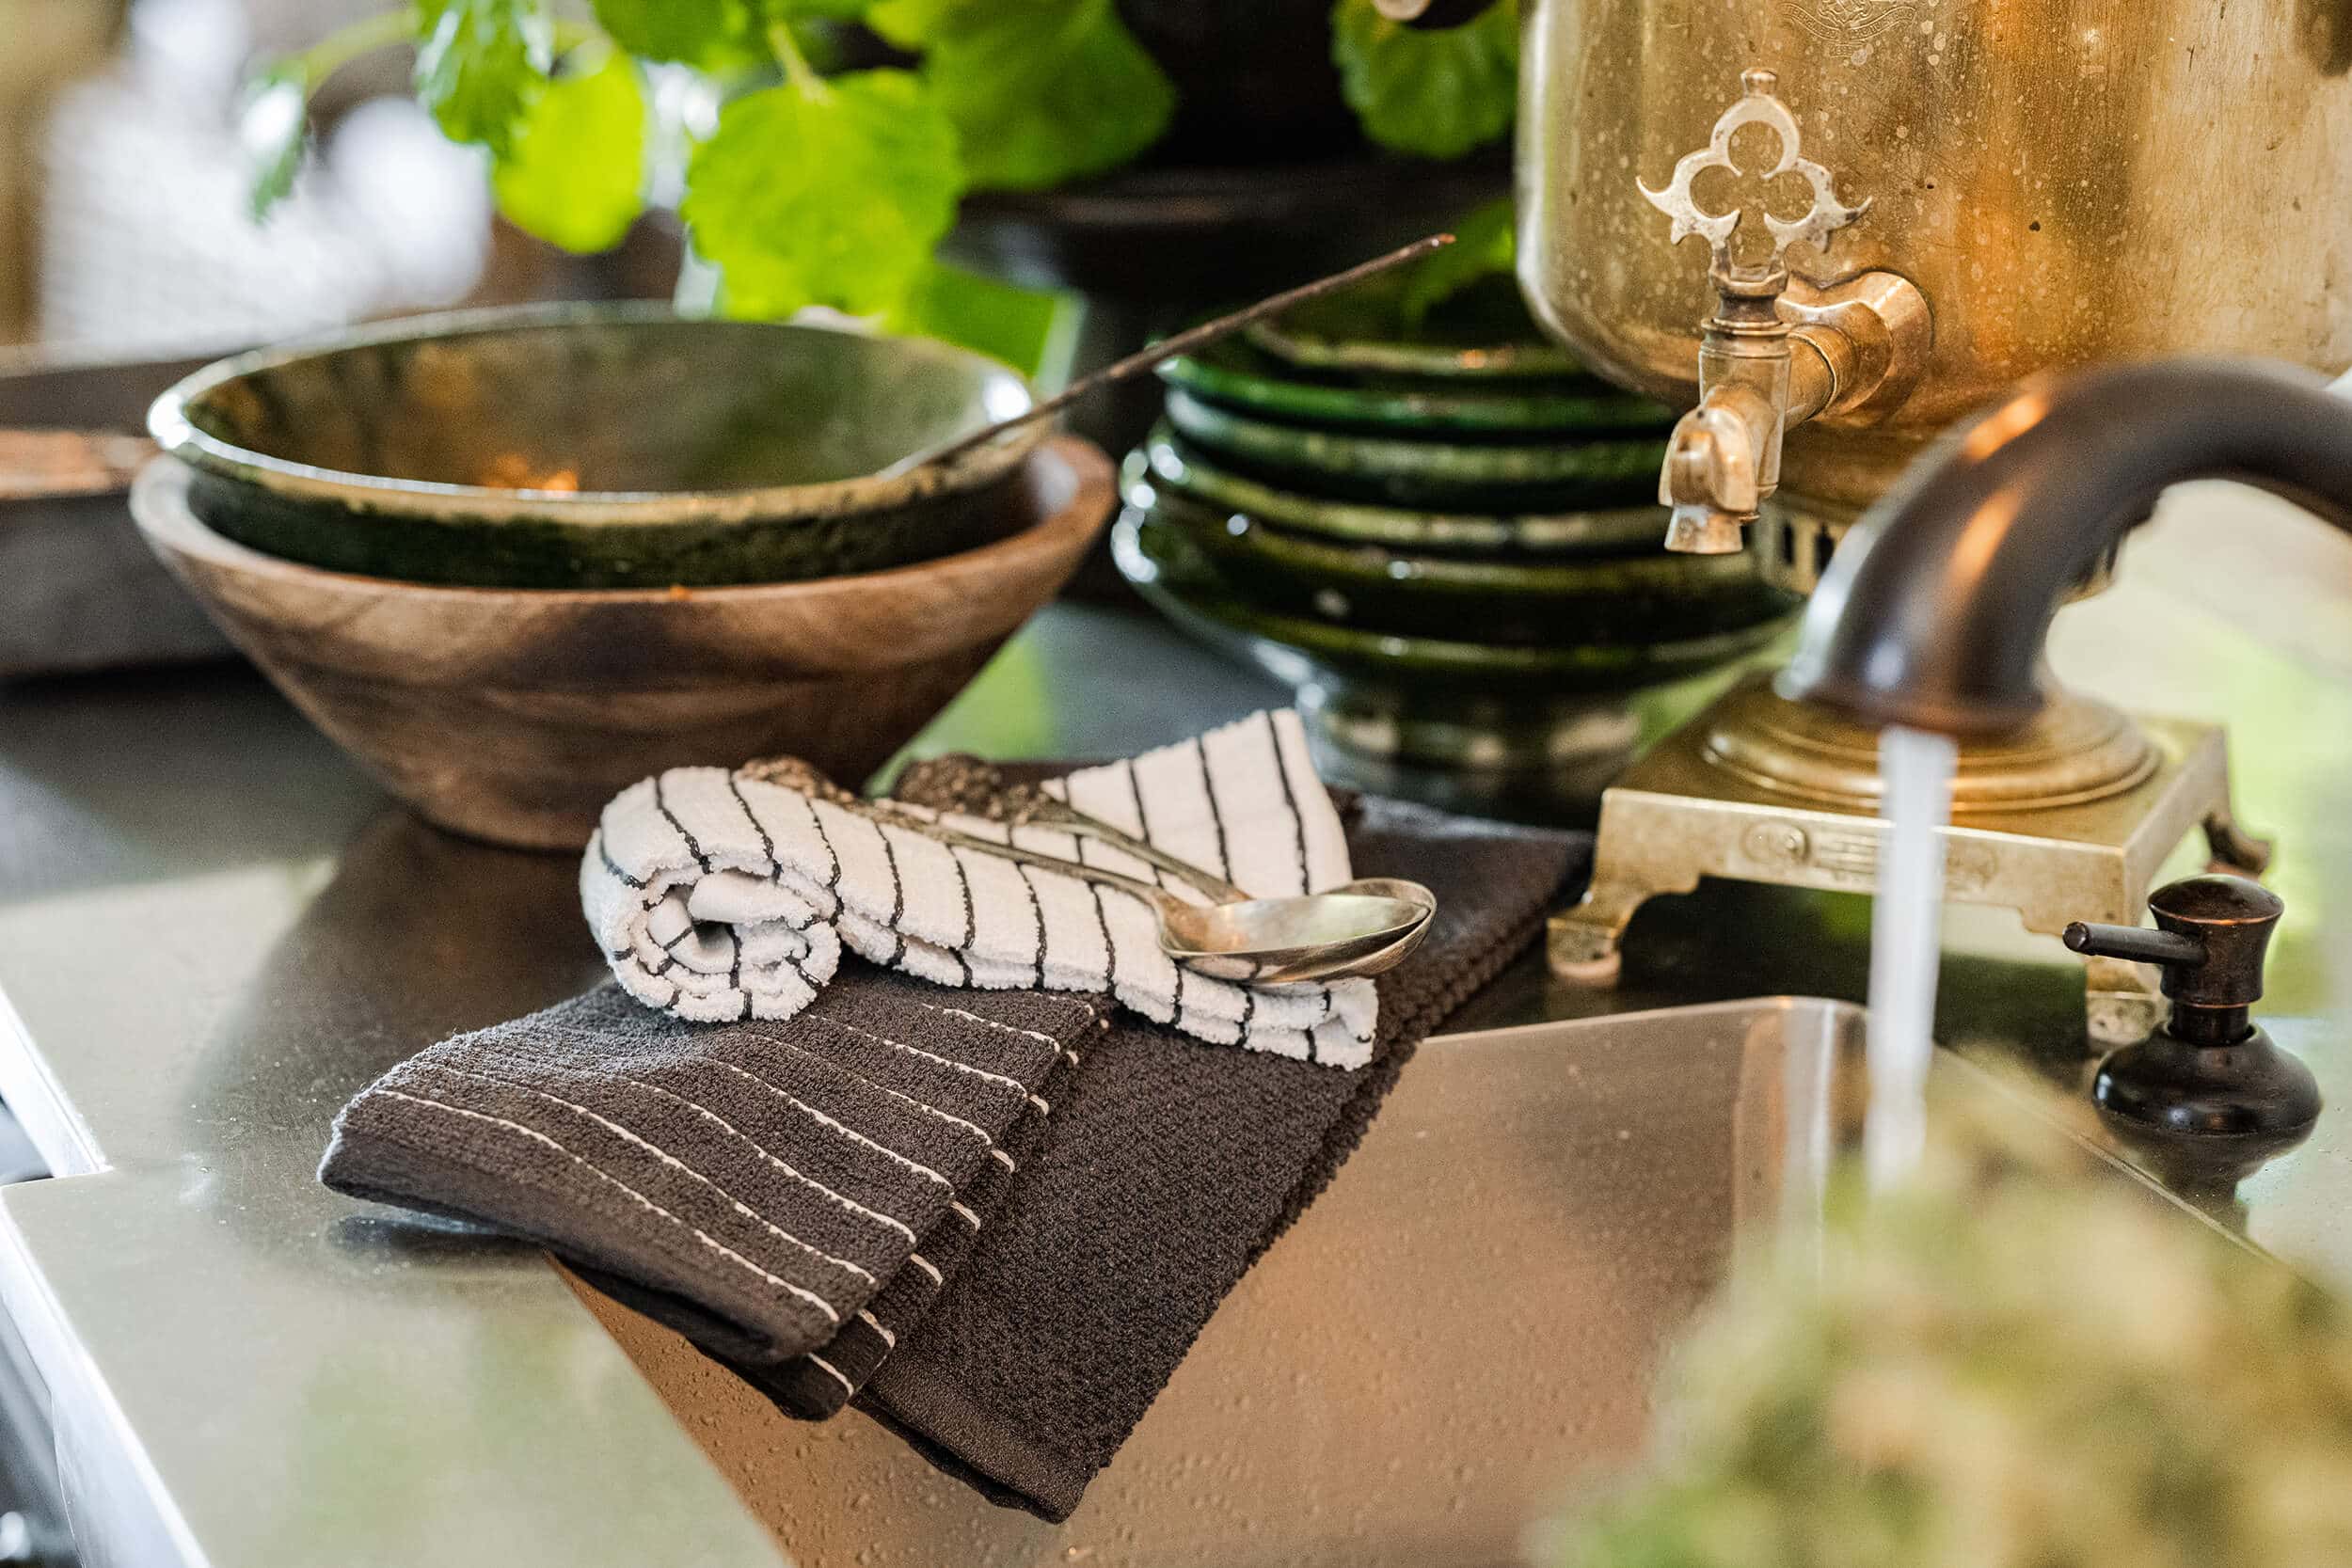 Atmospheric image of kitchen towels